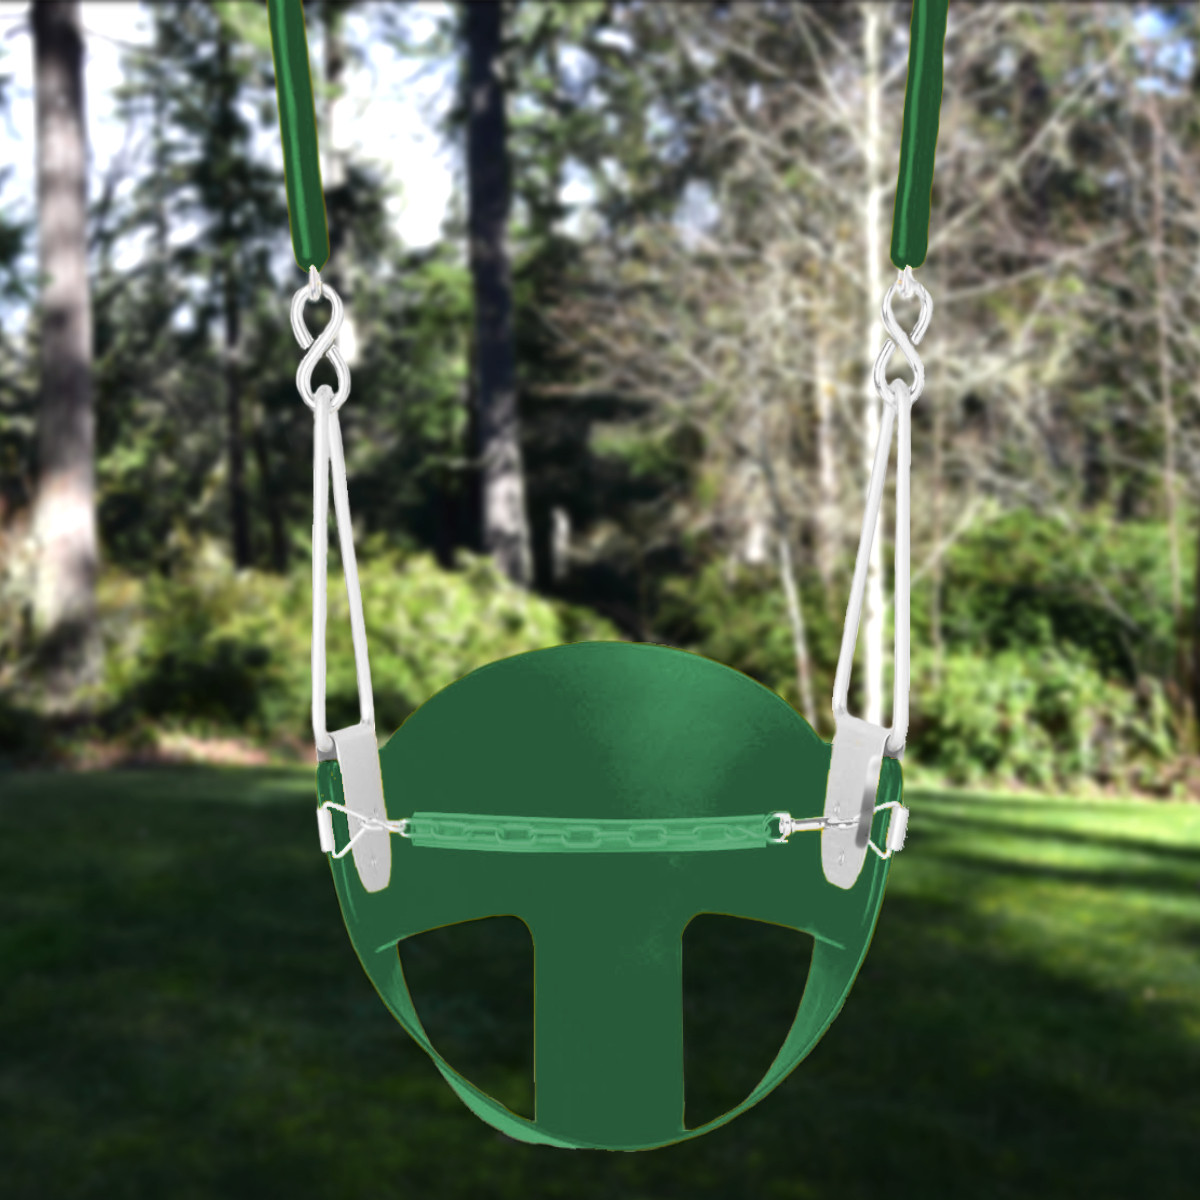 CoPoly Half Bucket Swing Seat with 5'6" Soft Grip Chain (S-133R)